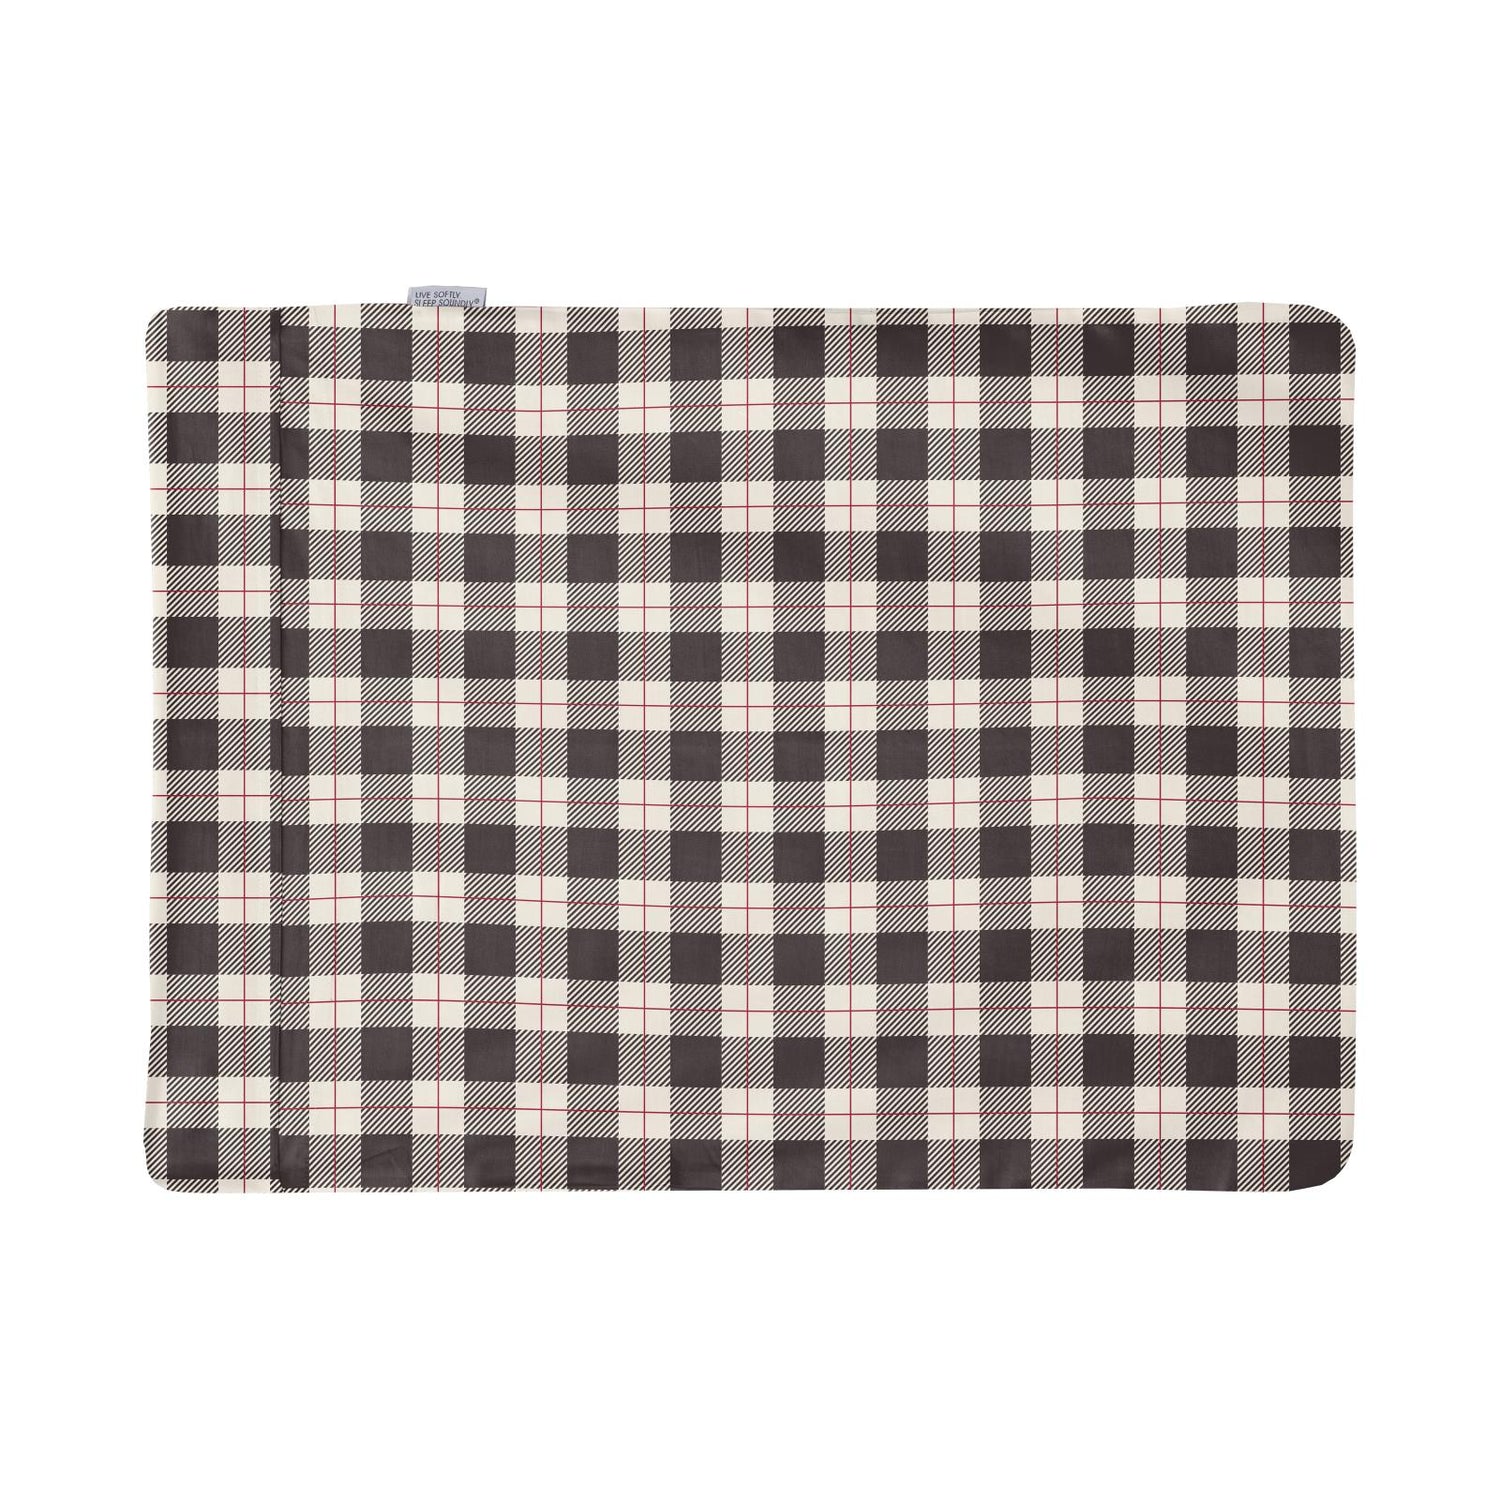 Print Woven Pillowcase in Midnight Holiday Plaid